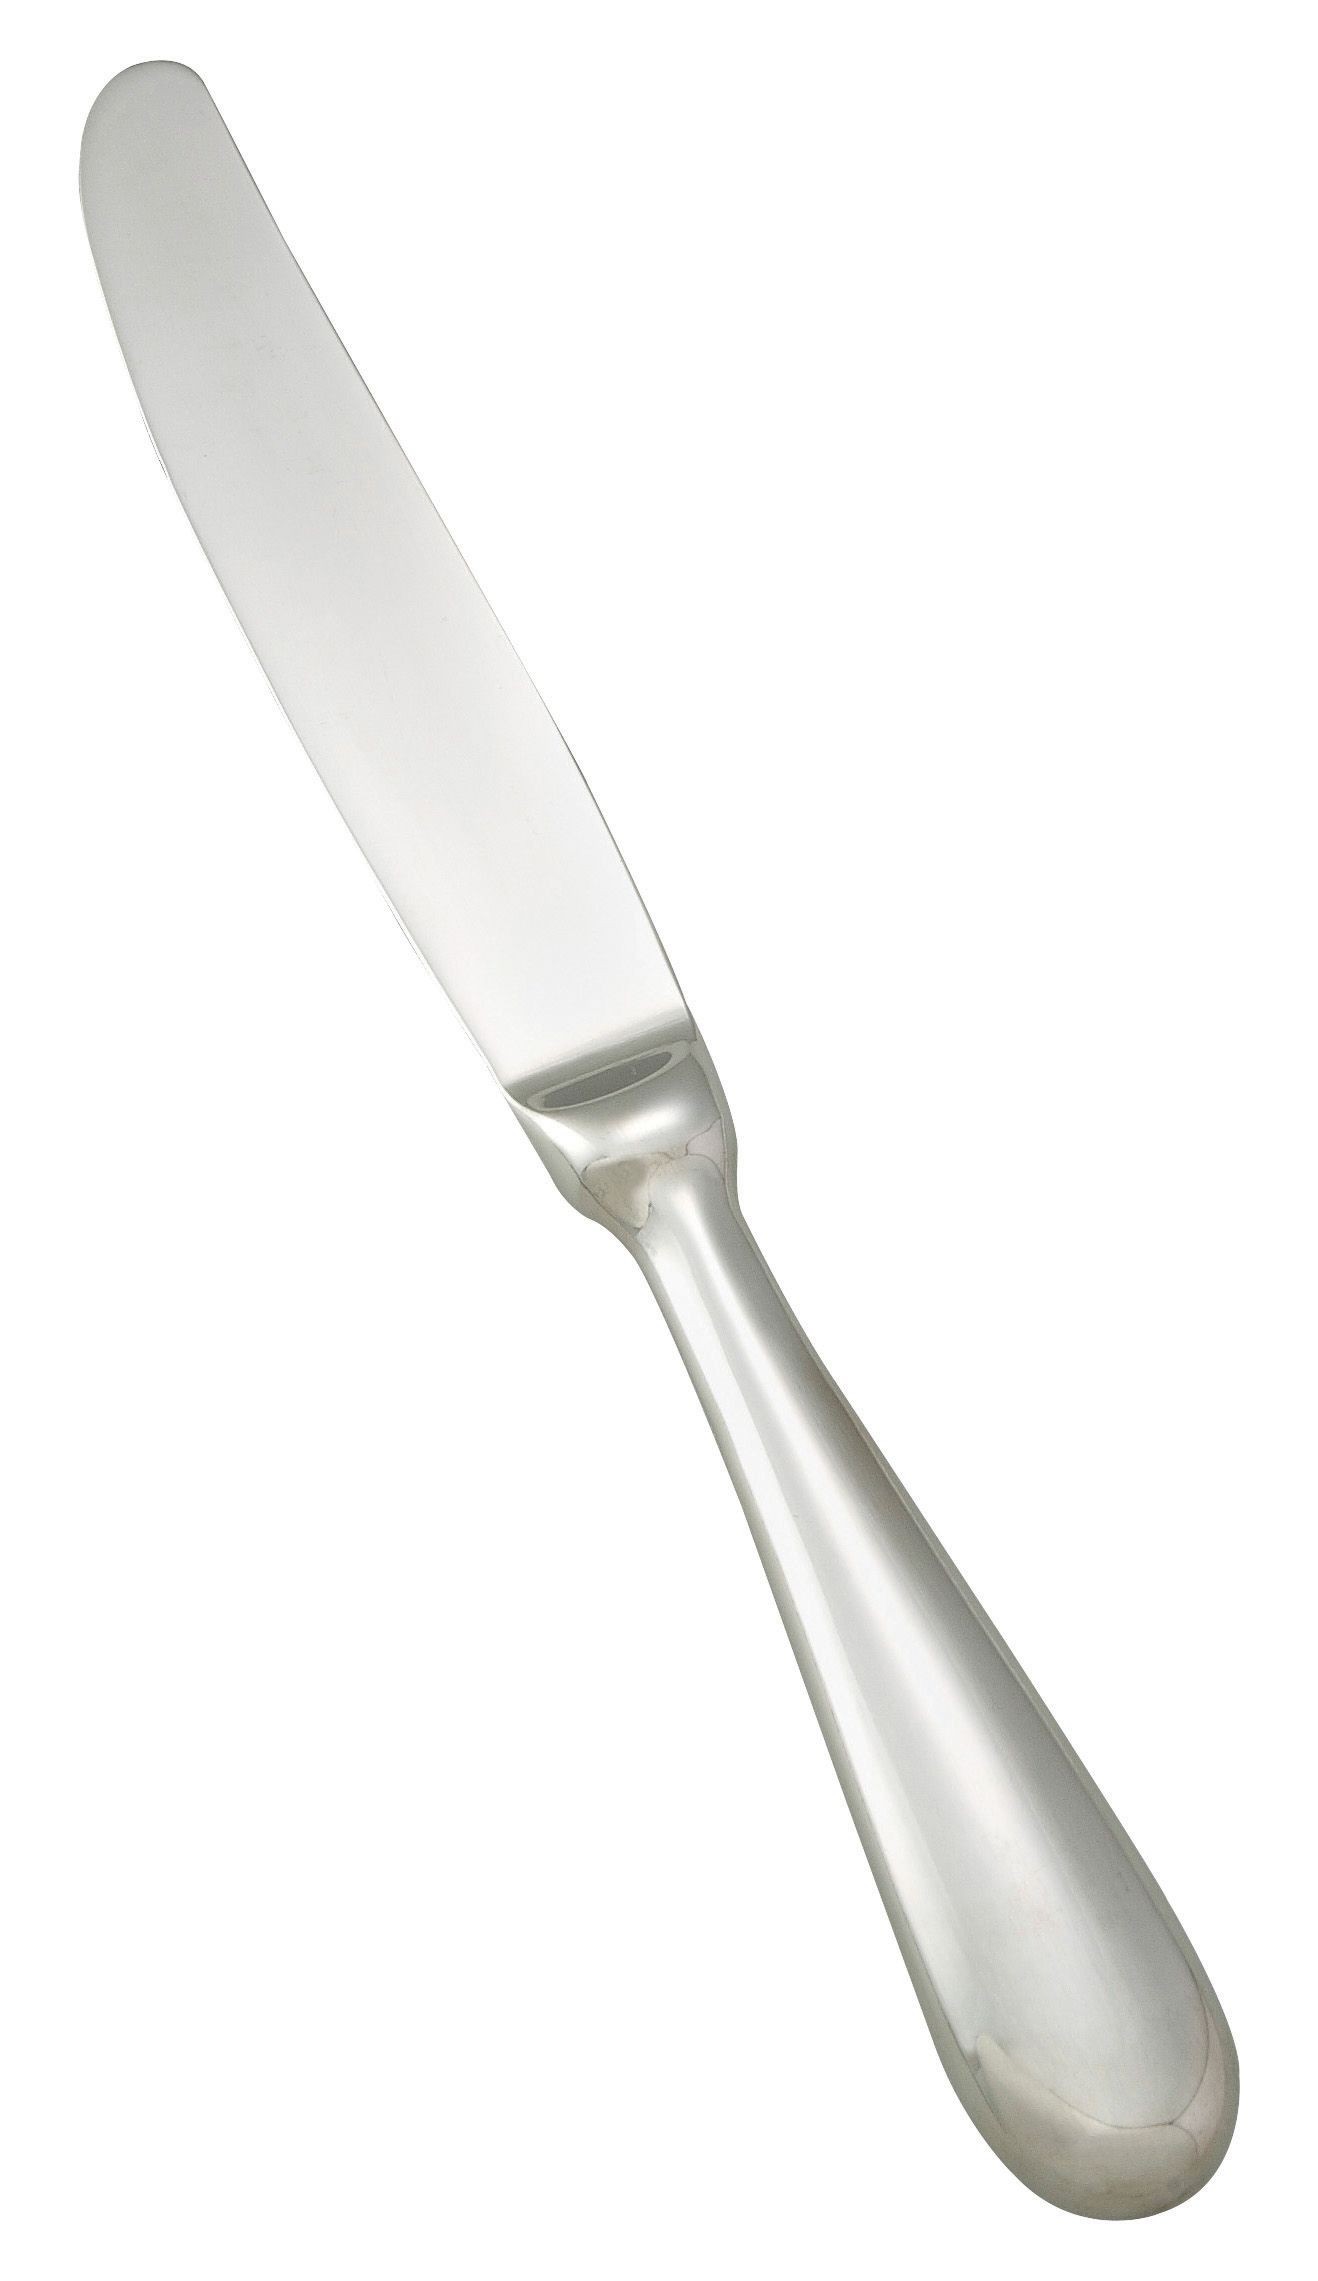 Winco 0034-18 Stanford Extra Heavy Stainless Steel Hollow Handle Table Knife (12/Pack)